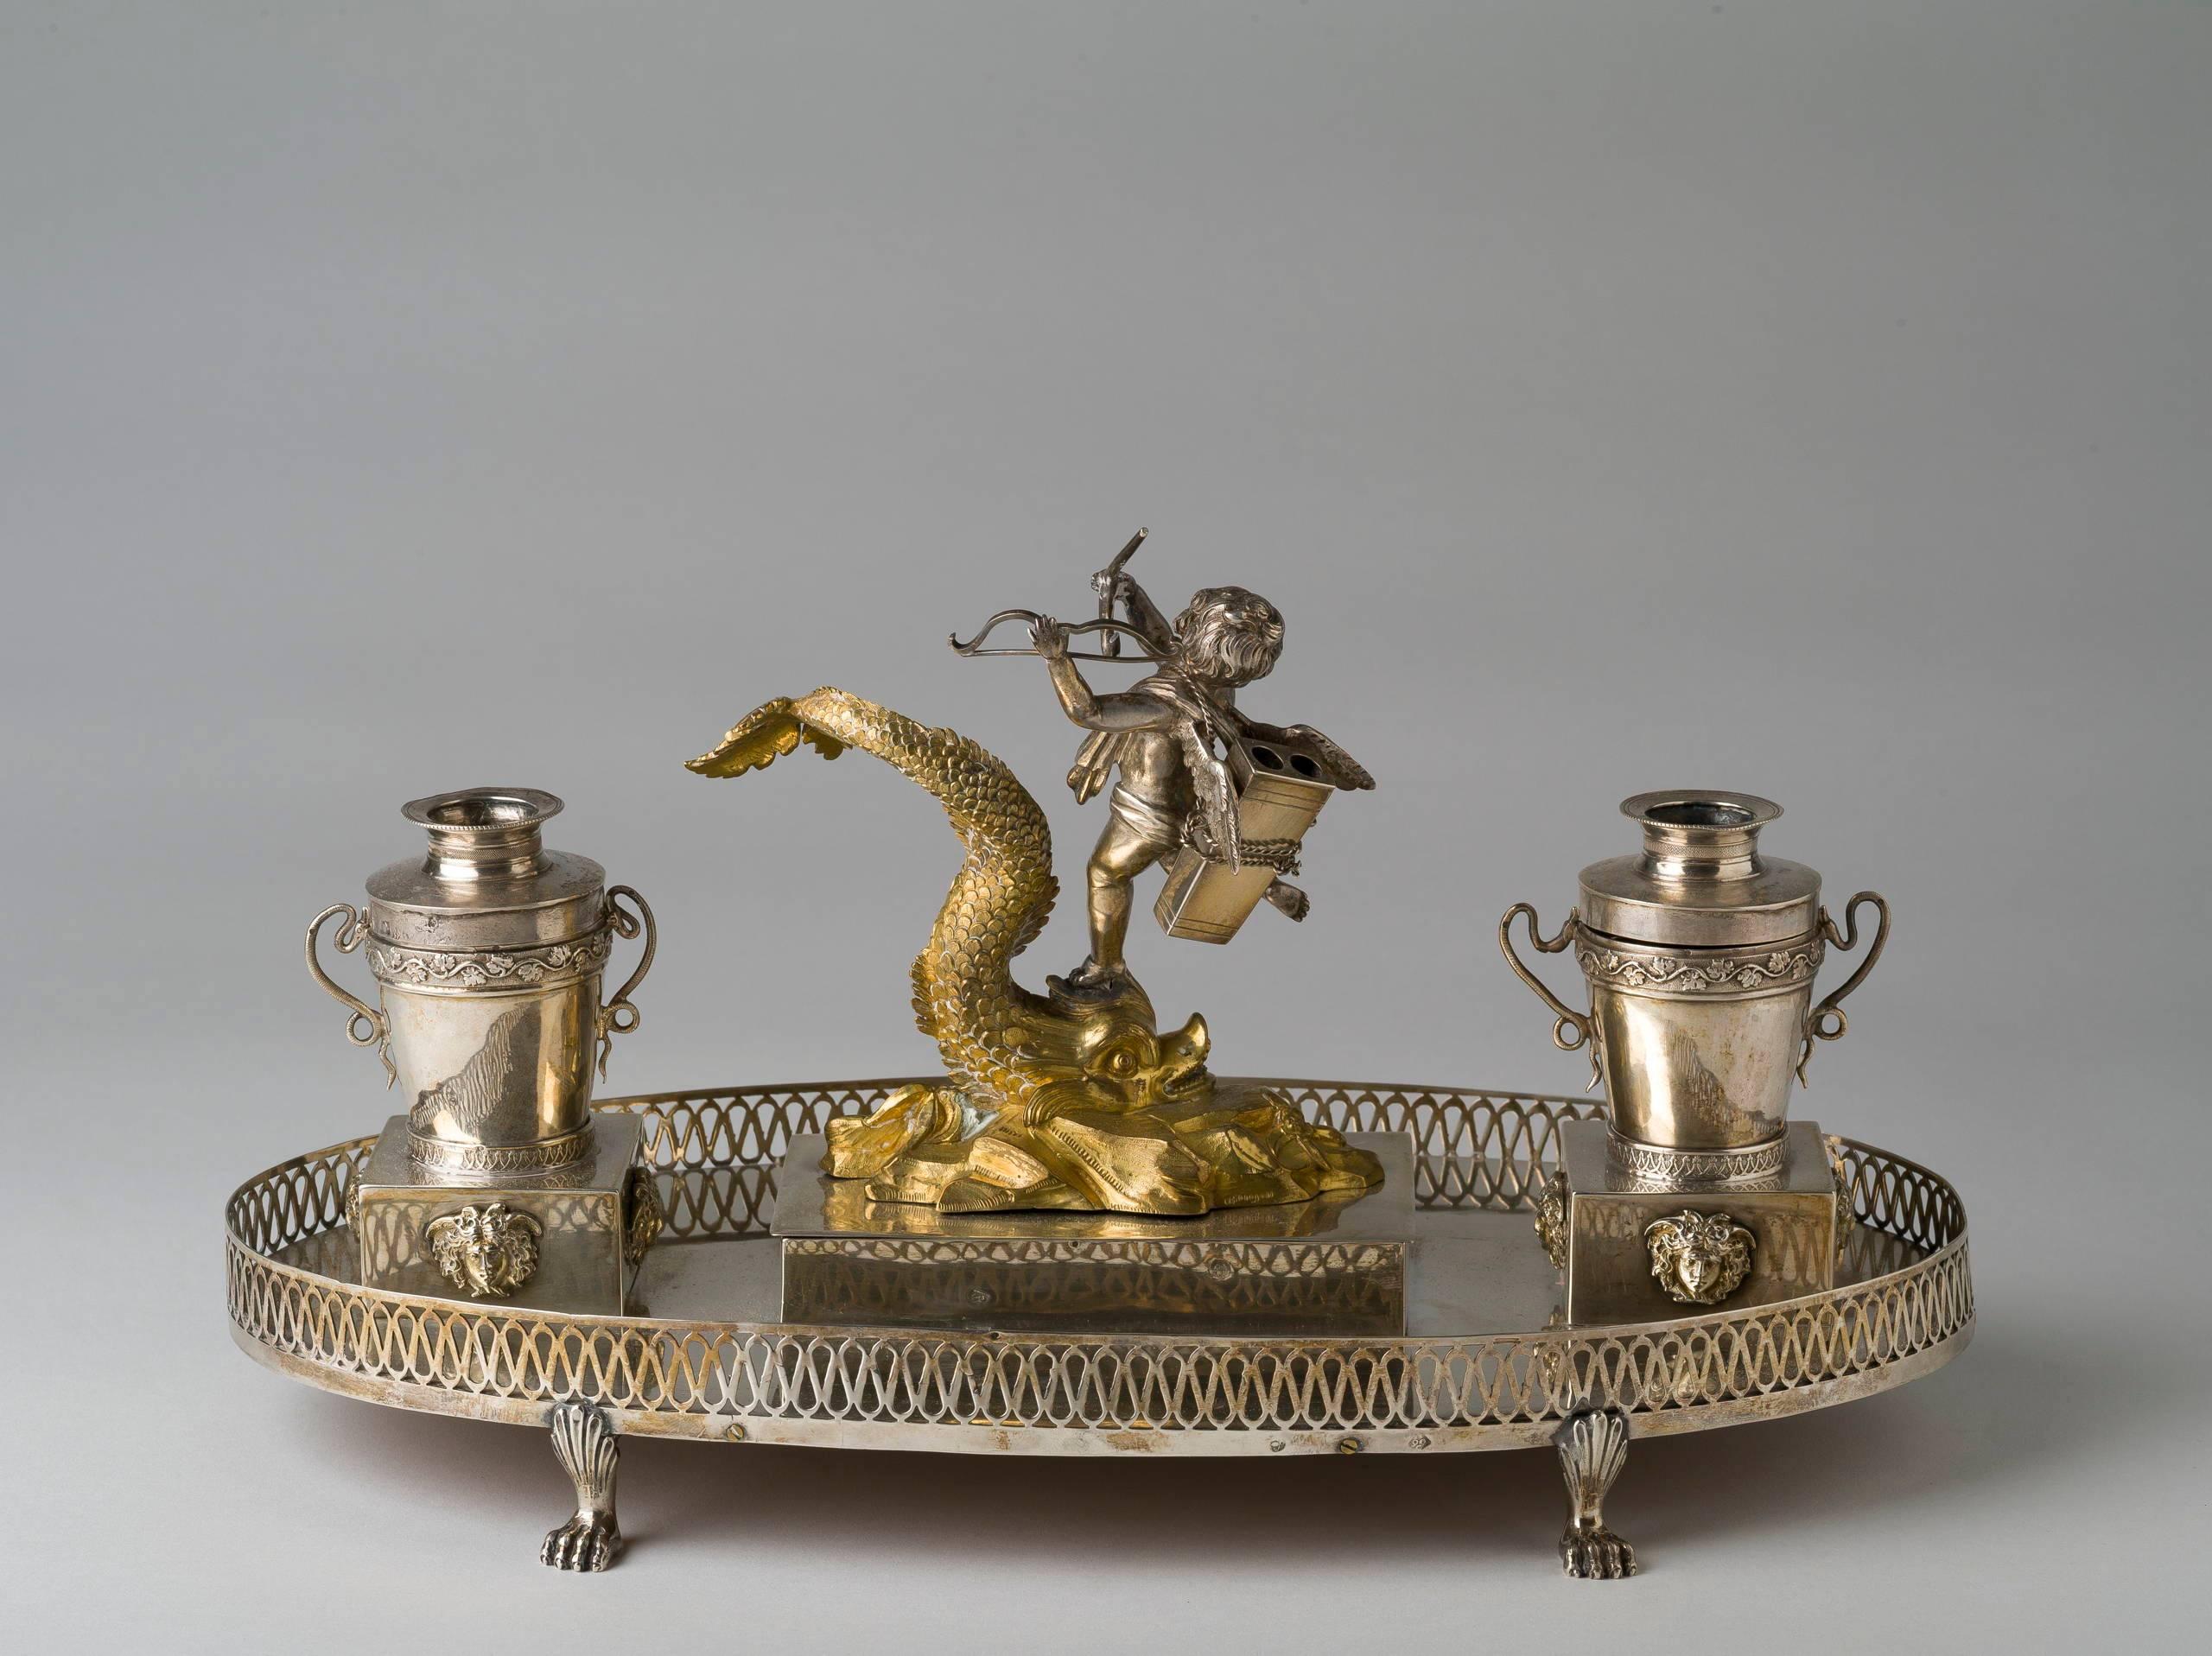 Of oval shape, with a cupid holding a bow and arrow riding aloft a gilt dolphin forming a lid over a compartment, flanked by ink and sand pots on masked plinths cast with Medusa masks and mounted to a lion's-paw footed oval galleried tray. Marked